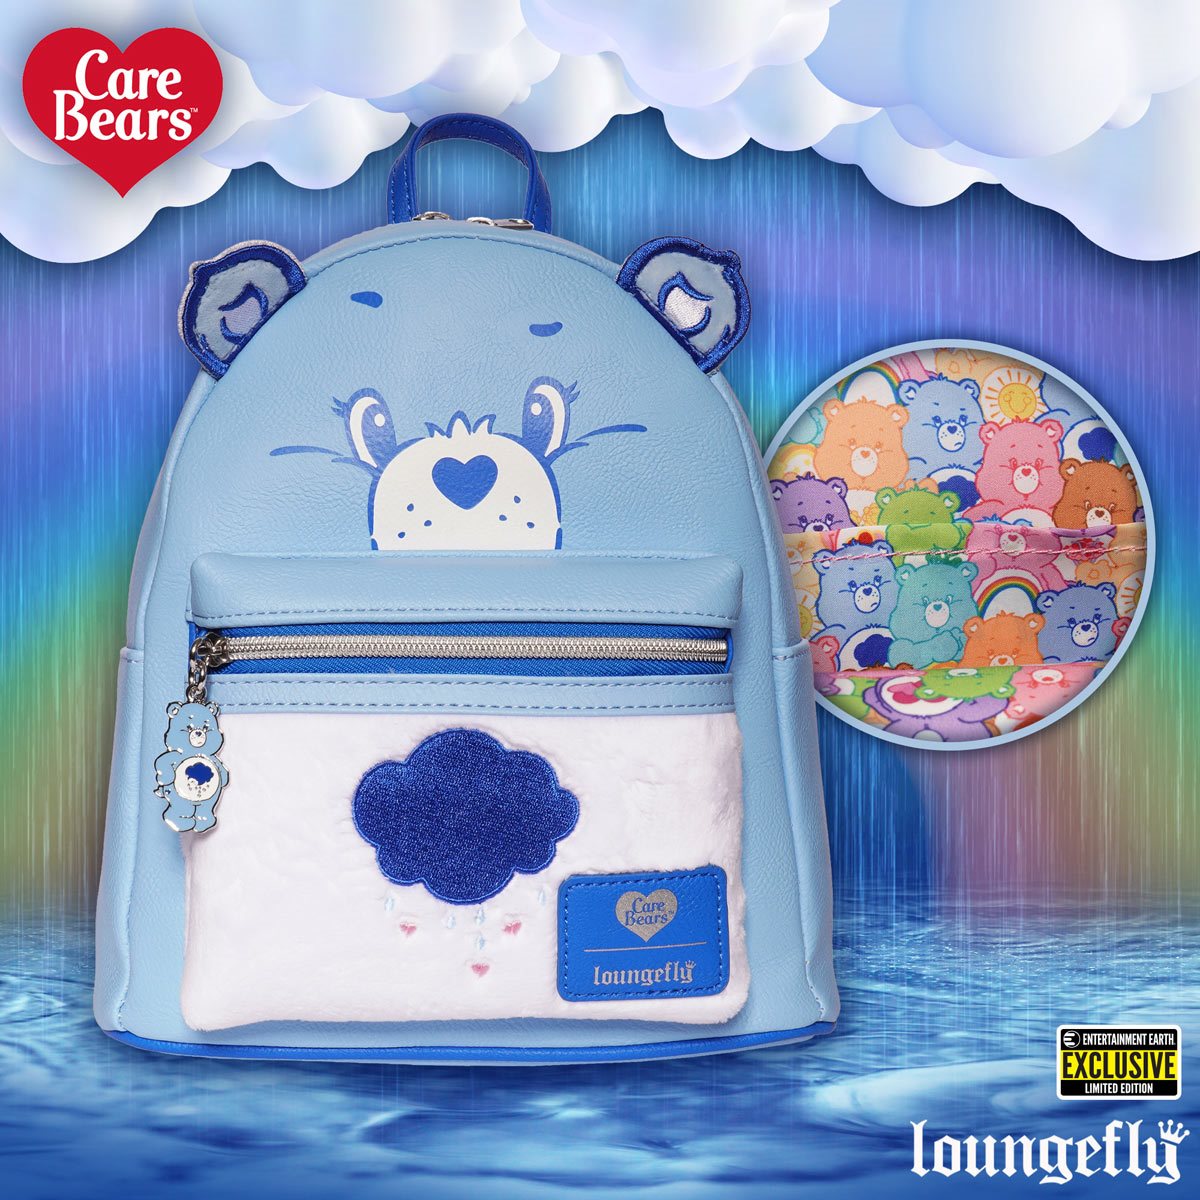 Loungefly EE Exclusive Care Bears Grumpy Flocked Mini Backpack NEW